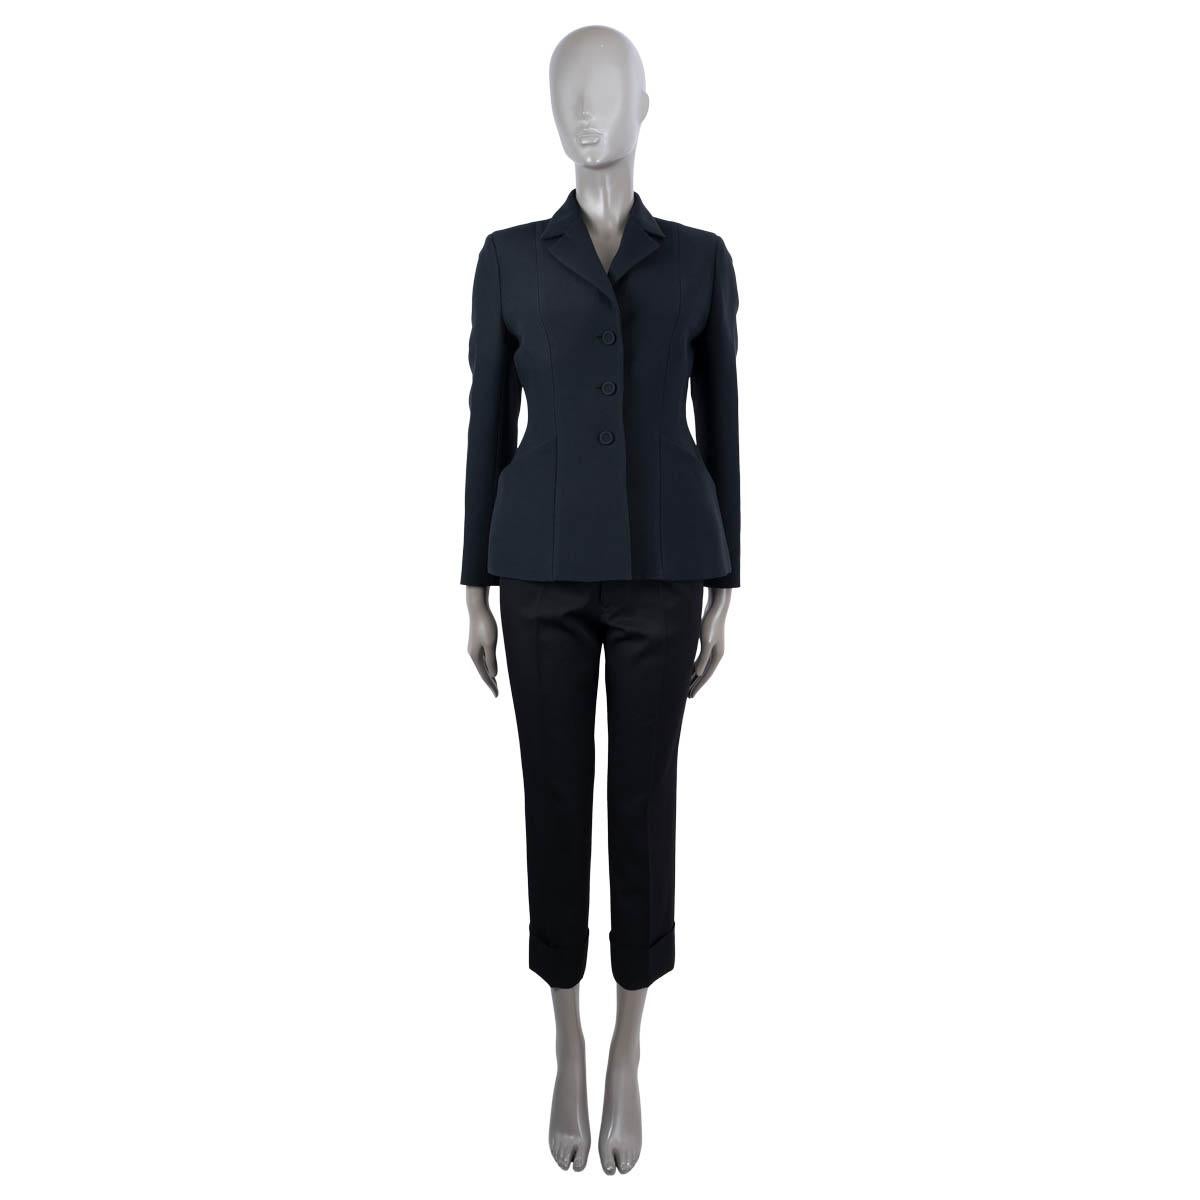 100% authentic Christian Dior 30 Montaigne Bar jacket in midnight blue wool (77%) and silk (23%). Features a tailored, yet supple silhouette with delicately highlight waist, notch lapels and welt pockets. Closes with fabric covered buttons on the